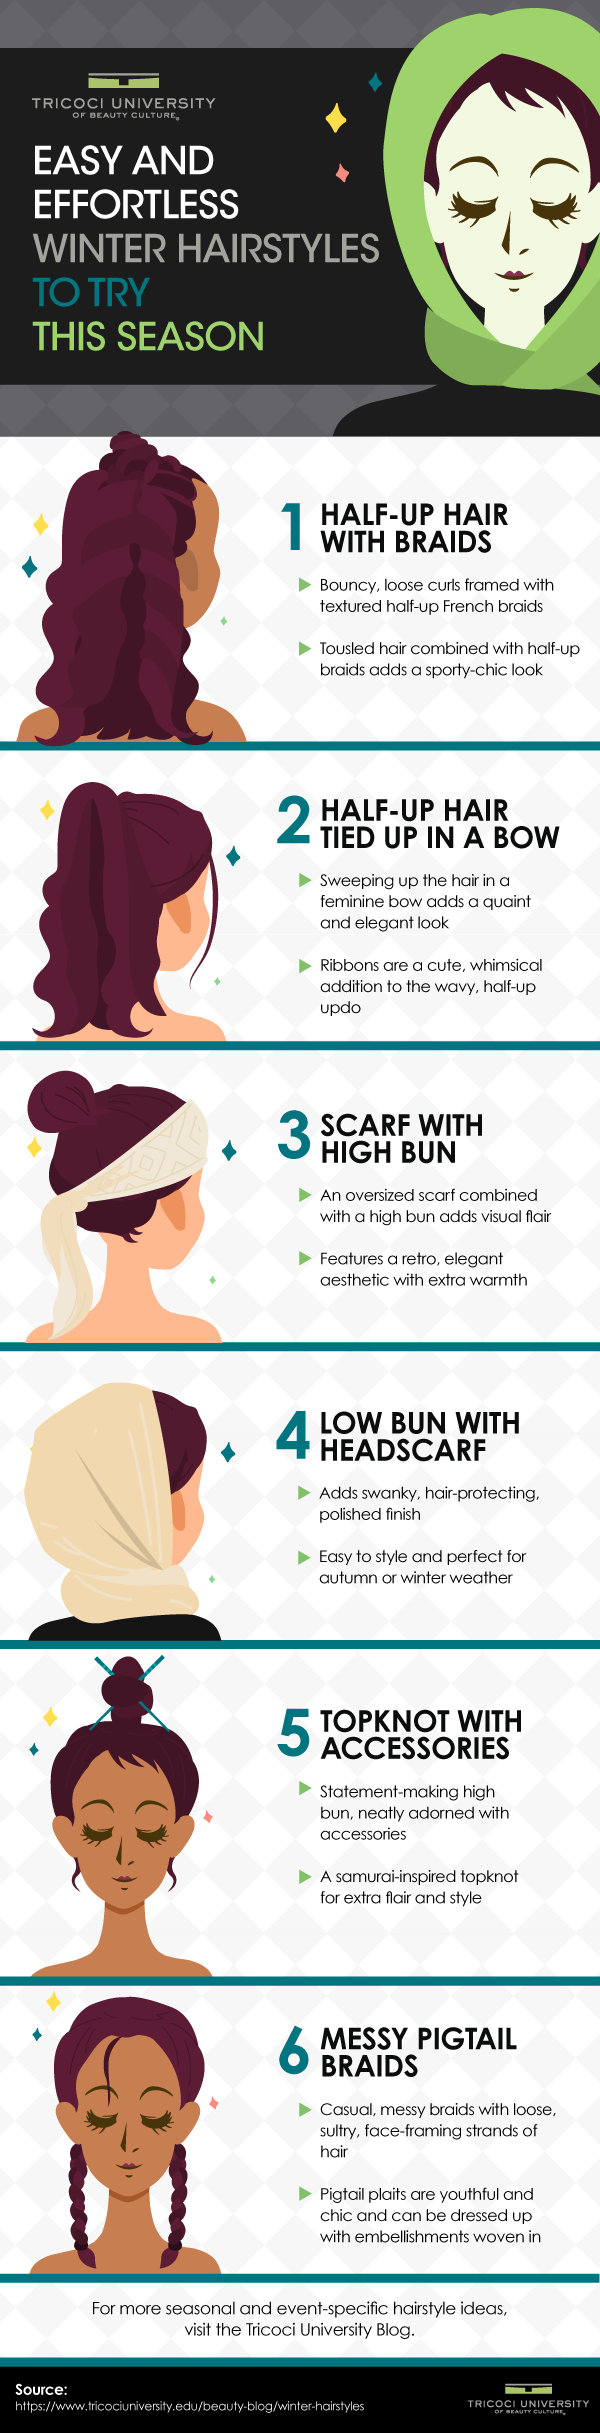 hairstyles for winter